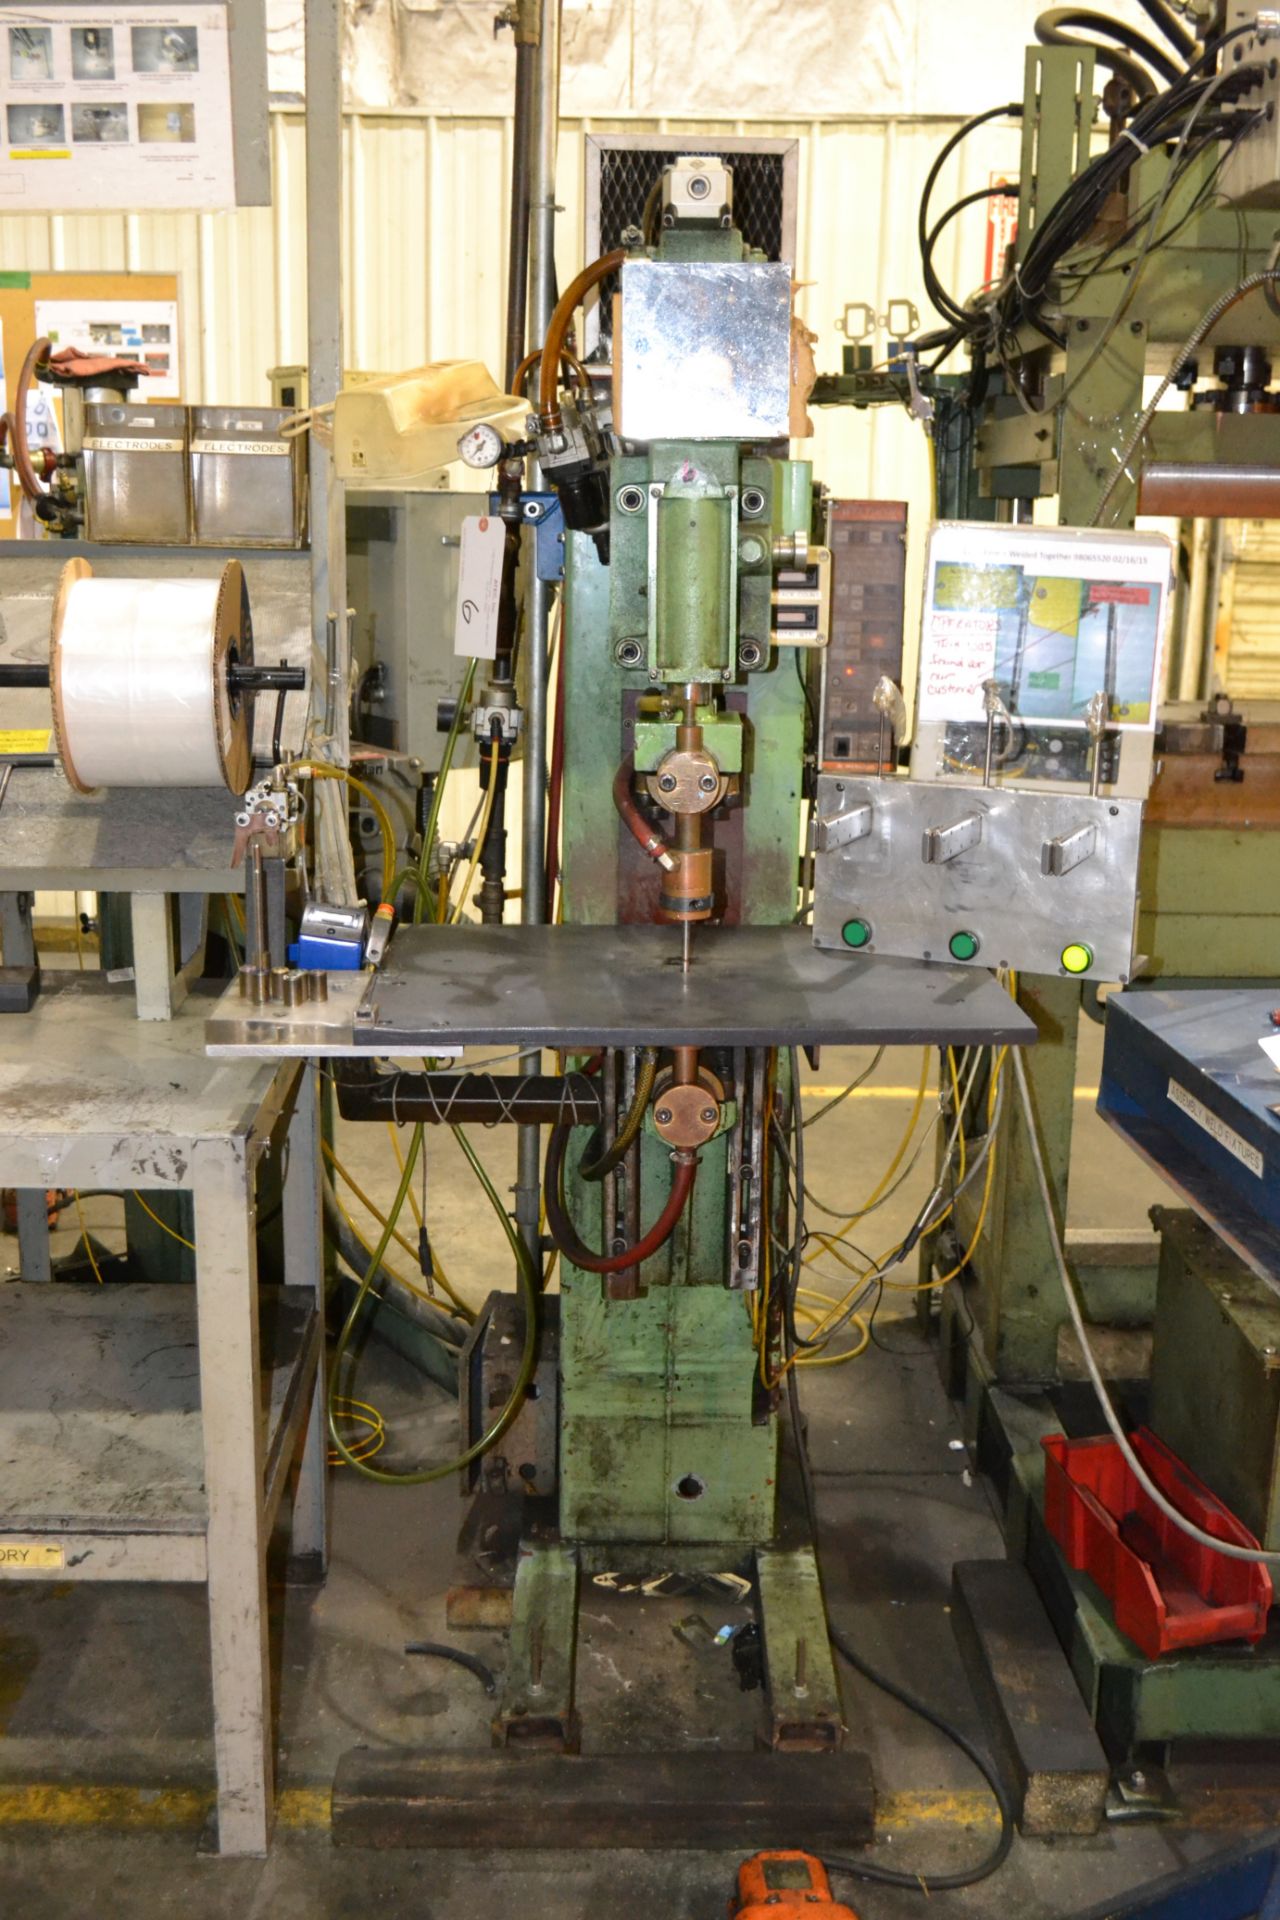 Press Type Spot Welder (Manufacturer Unknown) with Miyachi Weltouch CT-100A Controls, Bernard - Image 2 of 3